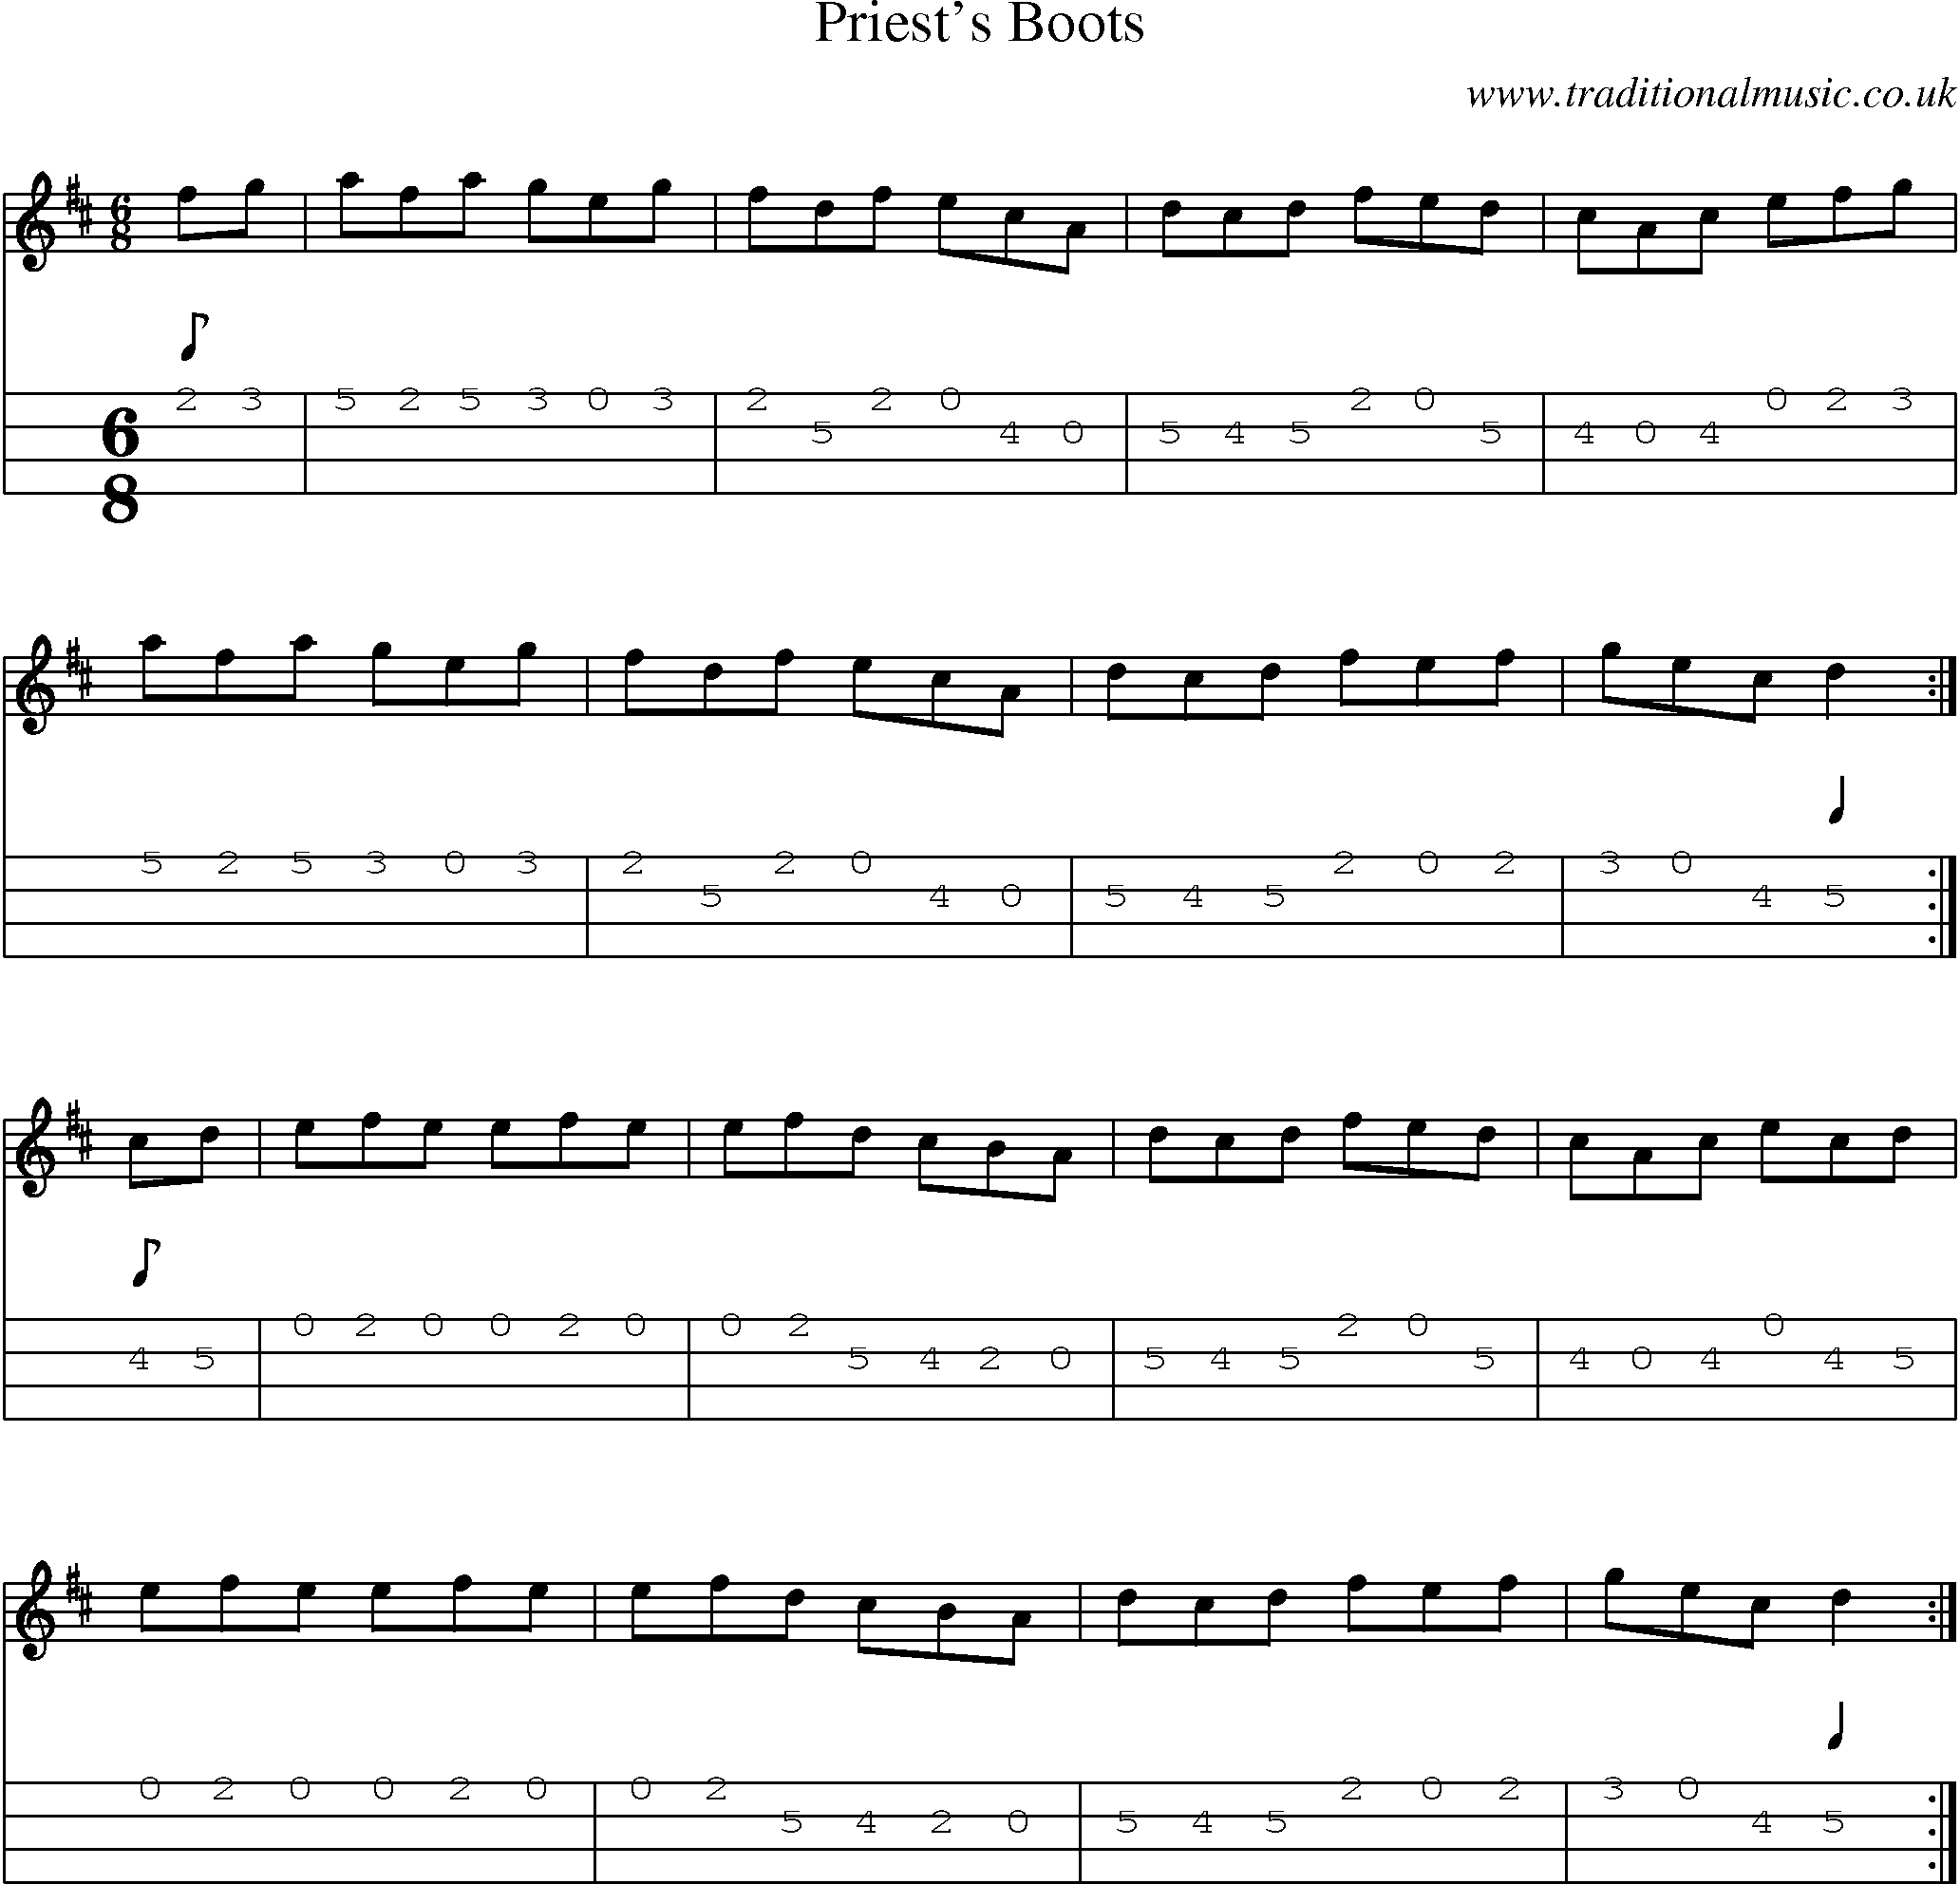 Music Score and Mandolin Tabs for Priests Boots